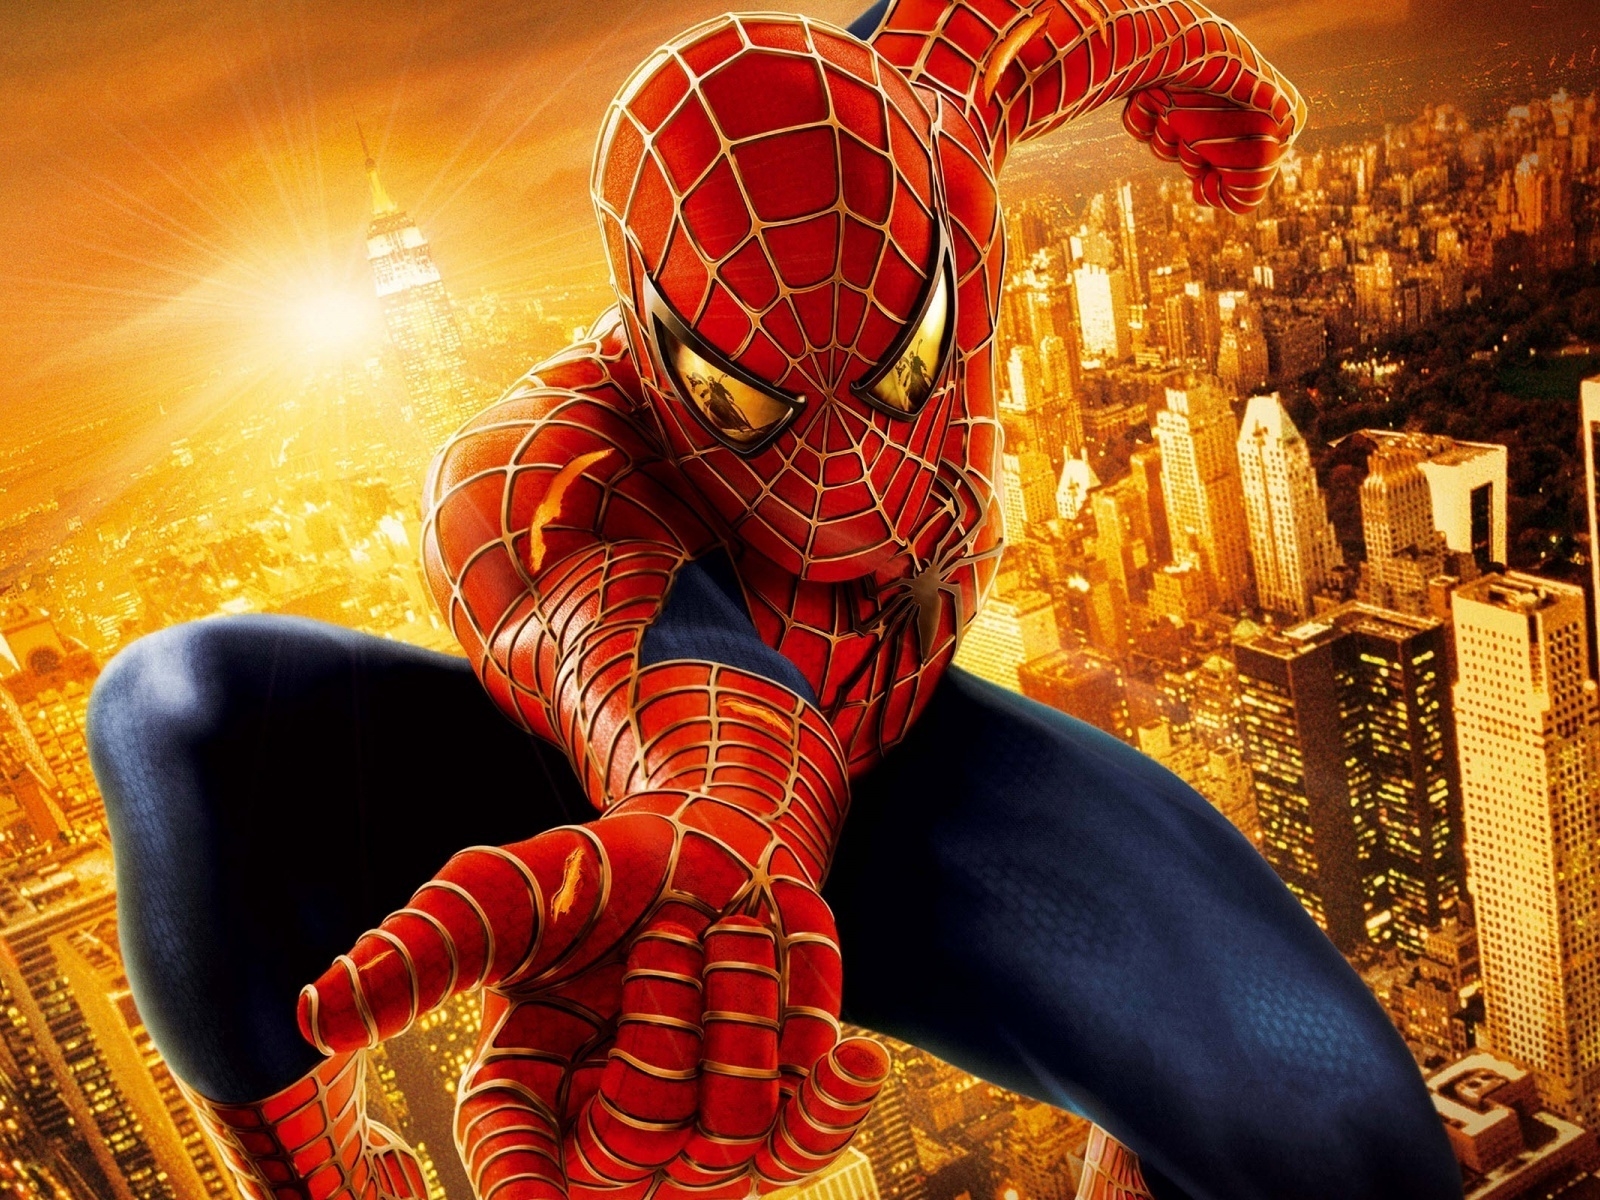 Spiderman Up for 1600 x 1200 resolution